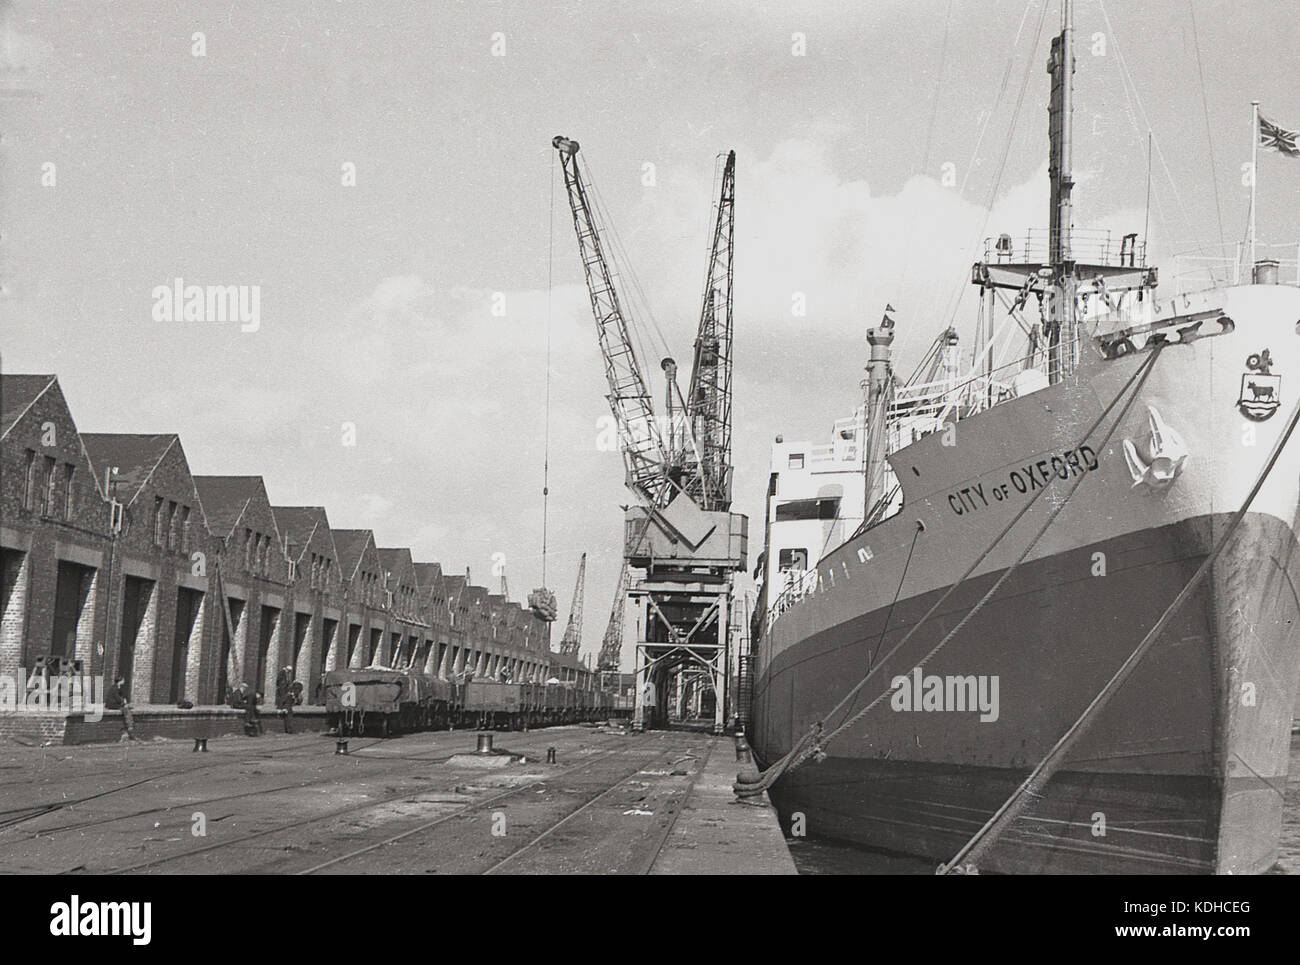 1960s, historical, the container ship, City of Oxford, moored at London Docks, London, England, UK. In the picture are the rail freight wagons beside storage depots. Built in 1948 in Glasgow on the Clyde by John Brown & Co for Ellerman Lines, the cargo ship was steam-powered and survived until 1978 when it was broken up. Stock Photo